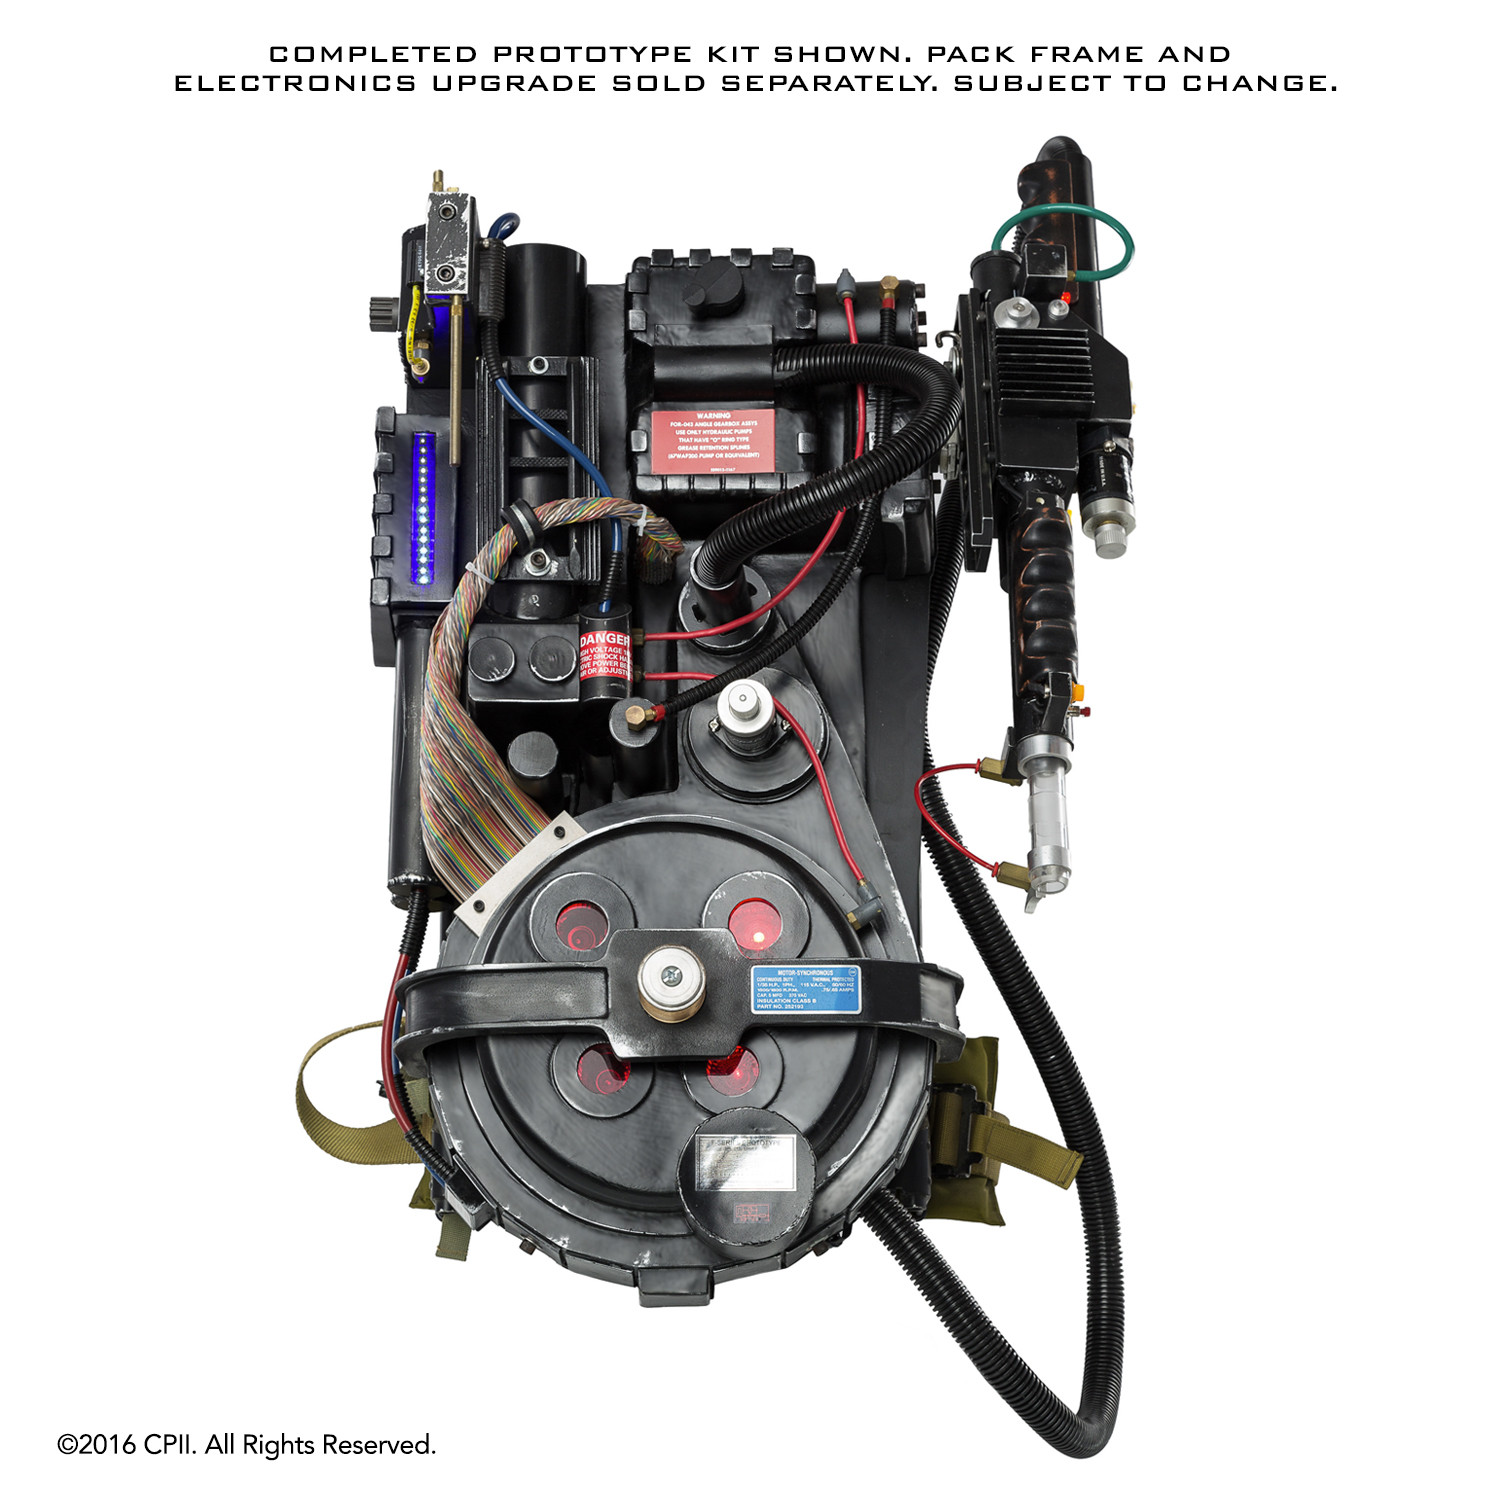 Ghostbusters Proton Pack Kit